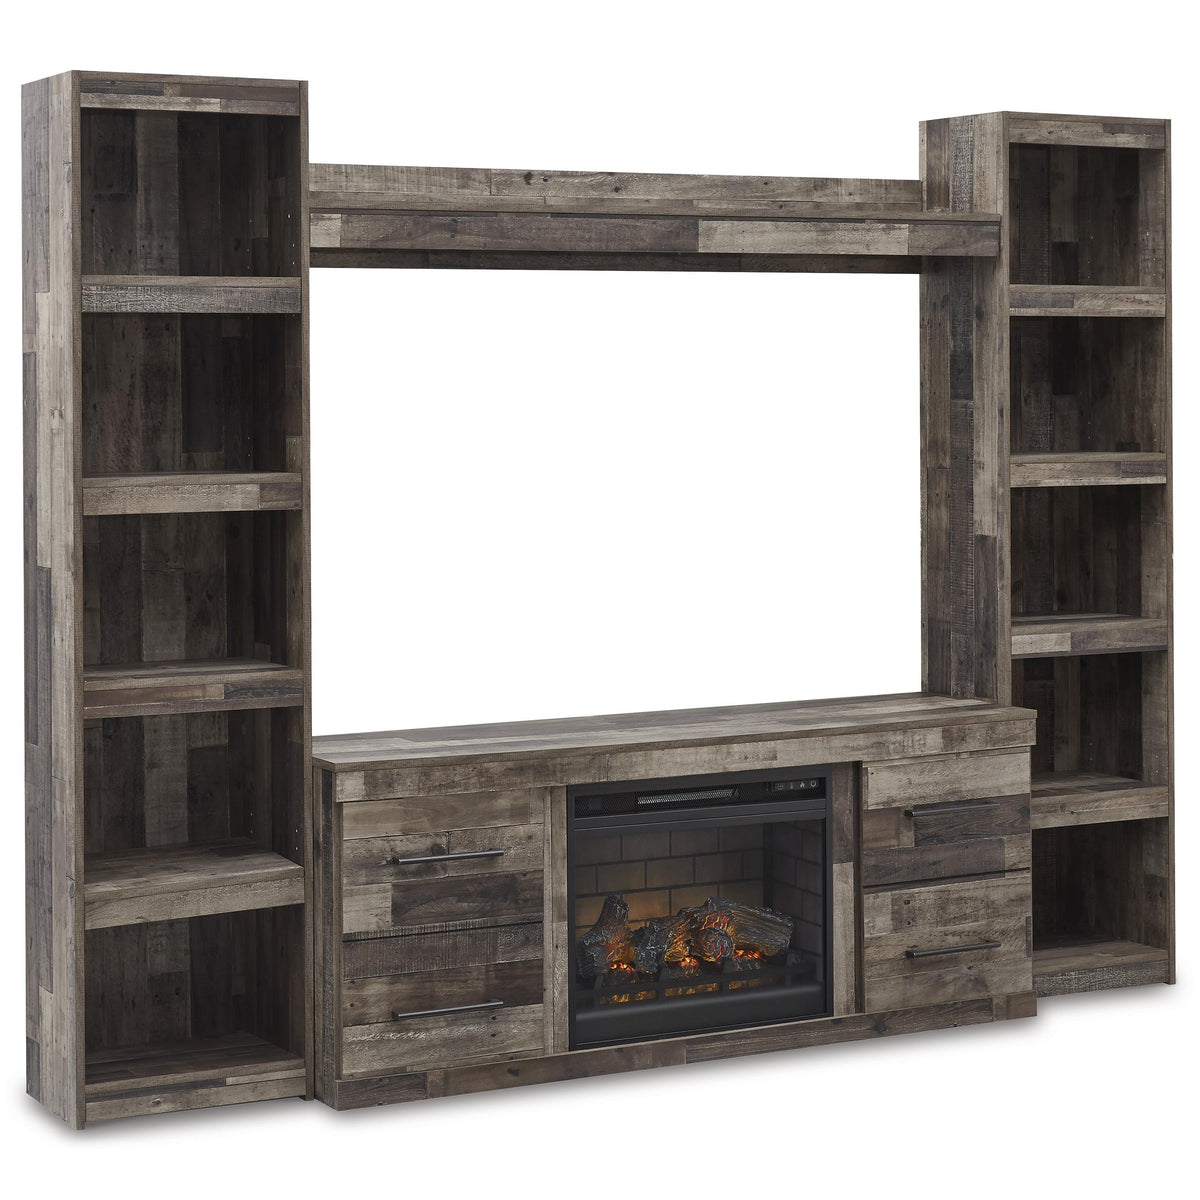 Signature Design by Ashley Derekson EW0200W8 4 pc Entertainment Center with Electric Fireplace